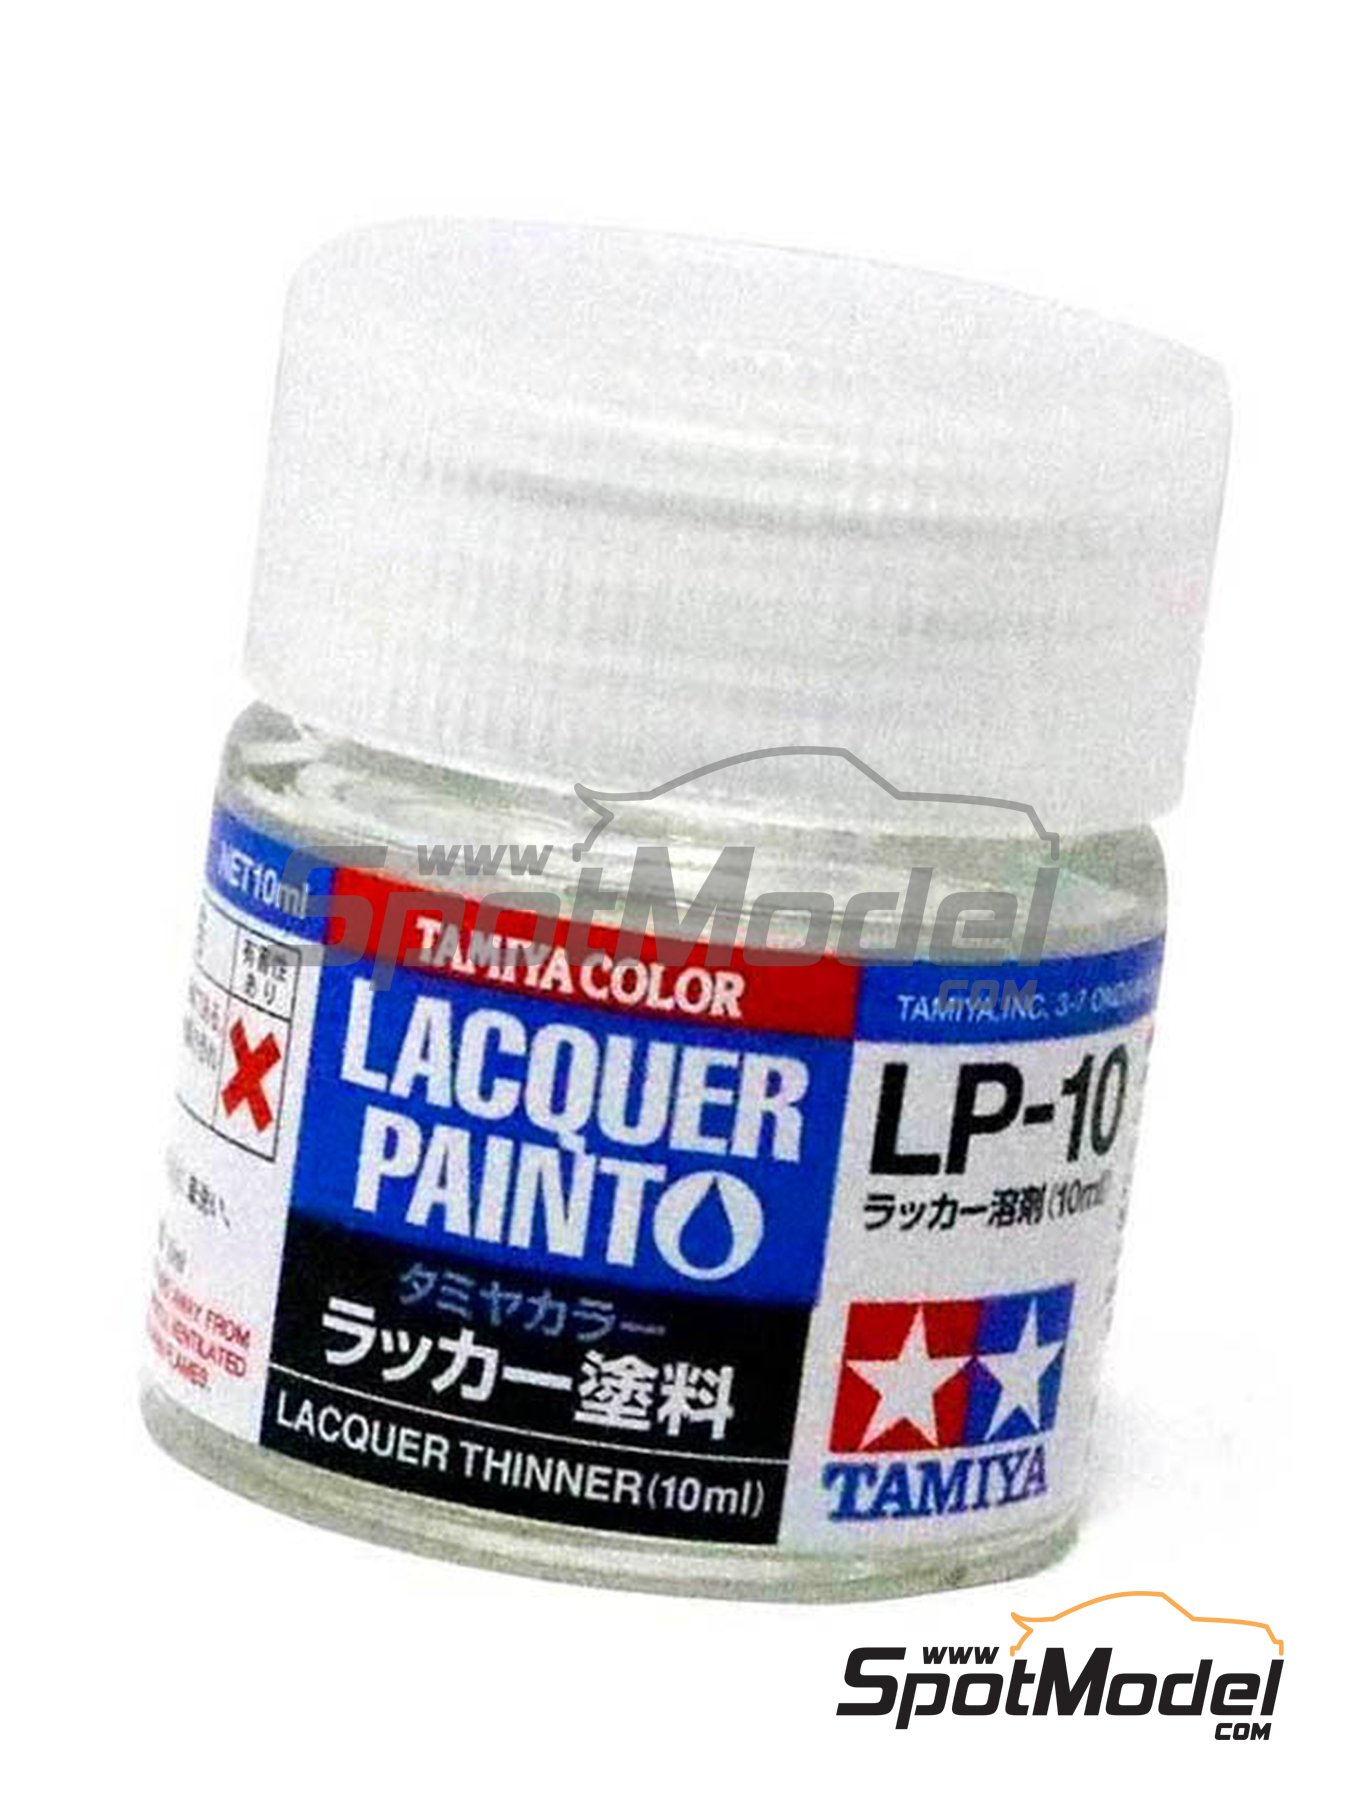 Tamiya 82110: Lacquer paint Thinner LP-10 1 x 10ml for Tamiya 82110  references LP-1, TAM82101, LP-10, TAM82110, LP-11, TAM82111, LP-19,  TAM82119, LP-2, TAM82102, LP-20, TAM82120, LP-21, TAM82121, LP-22,  TAM82122, LP-23, TAM82123, LP-24